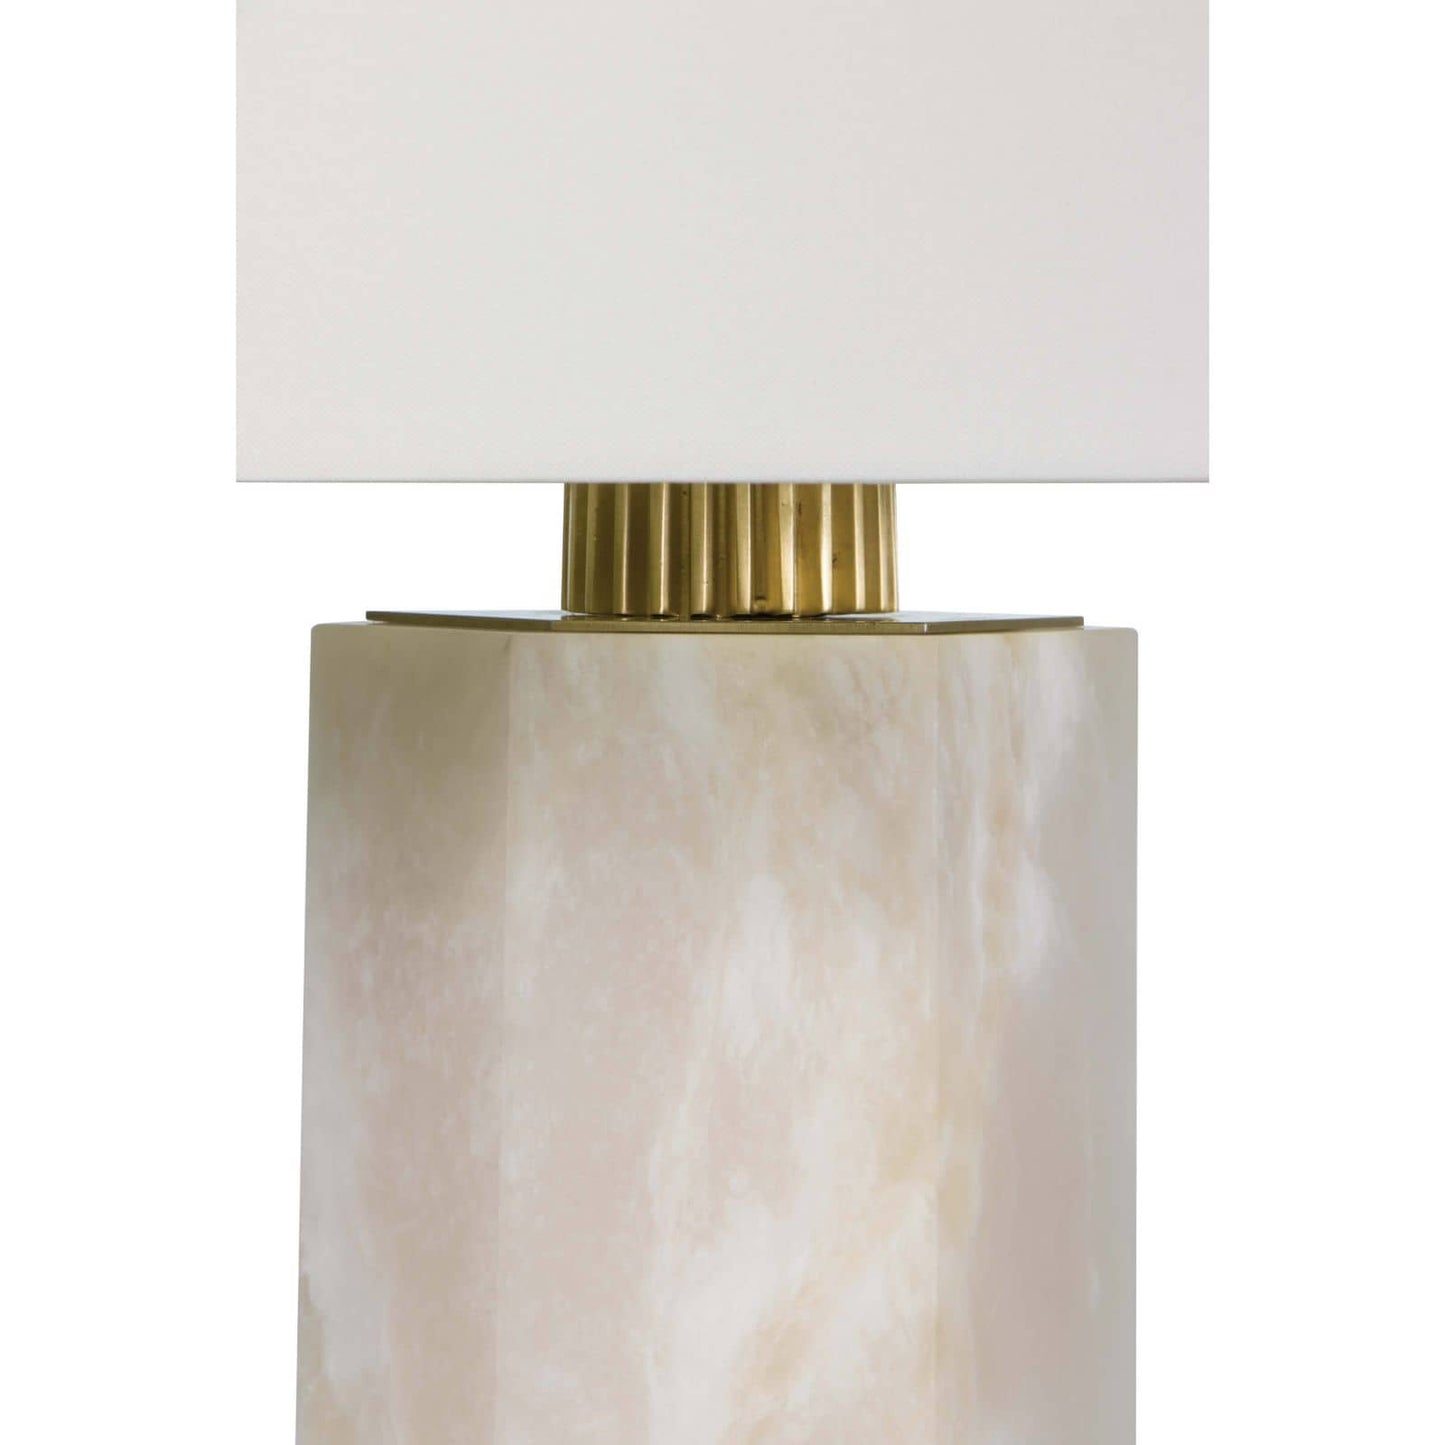 Gear Alabaster Table Lamp by Regina Andrew